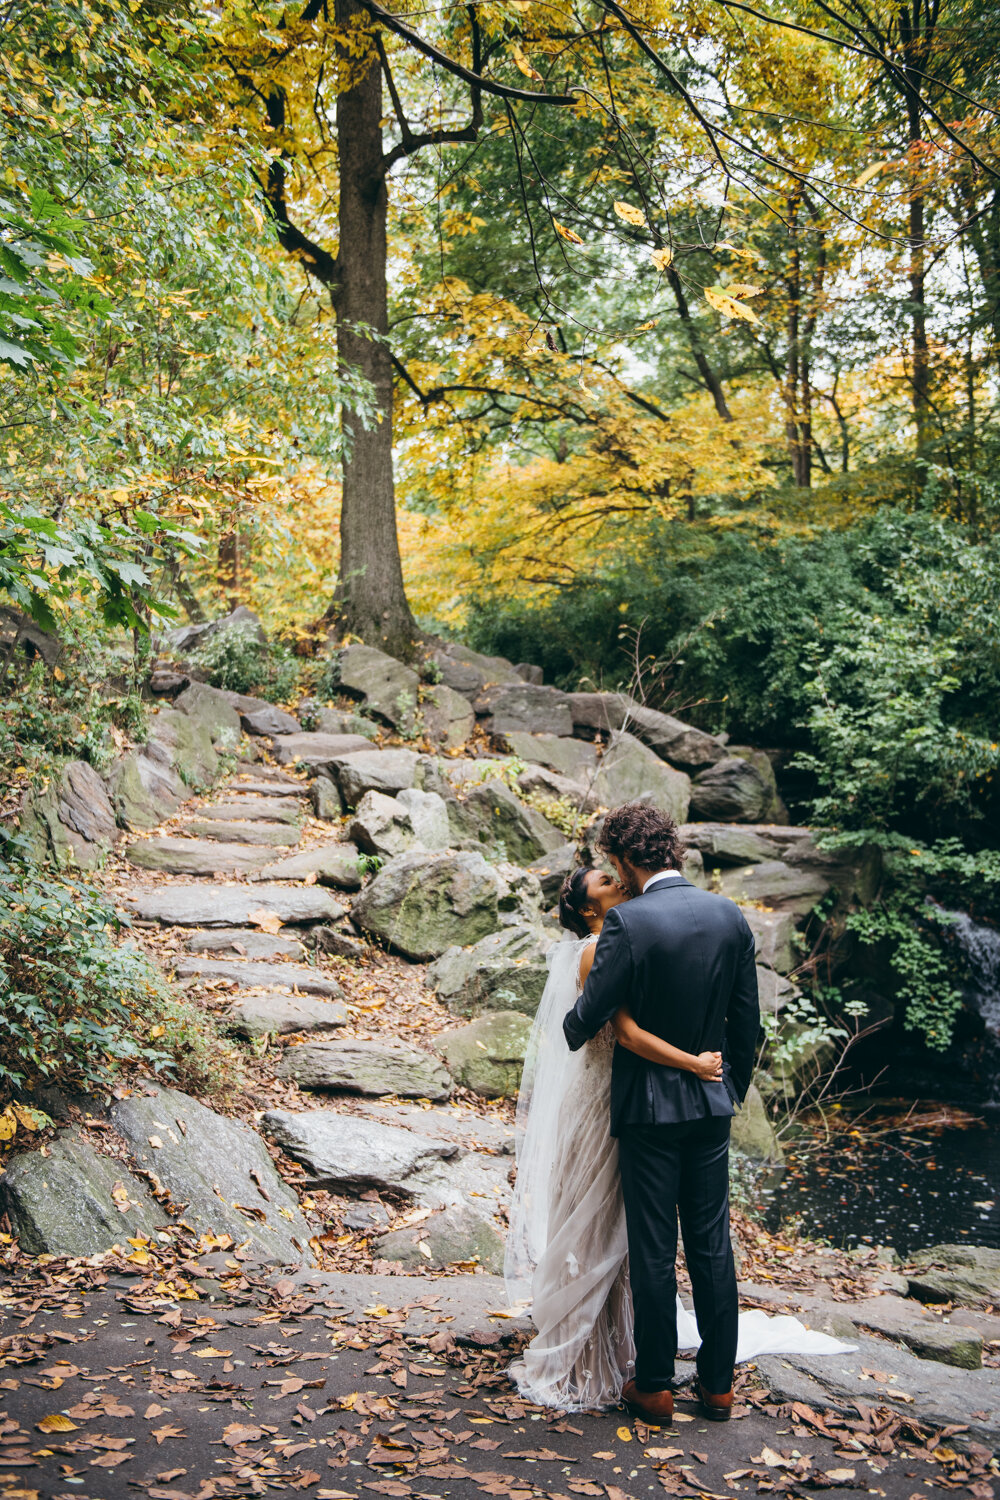 Bride and groom have their arms around each other and kiss in Central Park in front of a path of rocks and trees.

Central Park Wedding Photography. Williamsburg Bridge Bridal Portraits. Luxury NYC Wedding Photographer. Manhattan Micro Wedding.